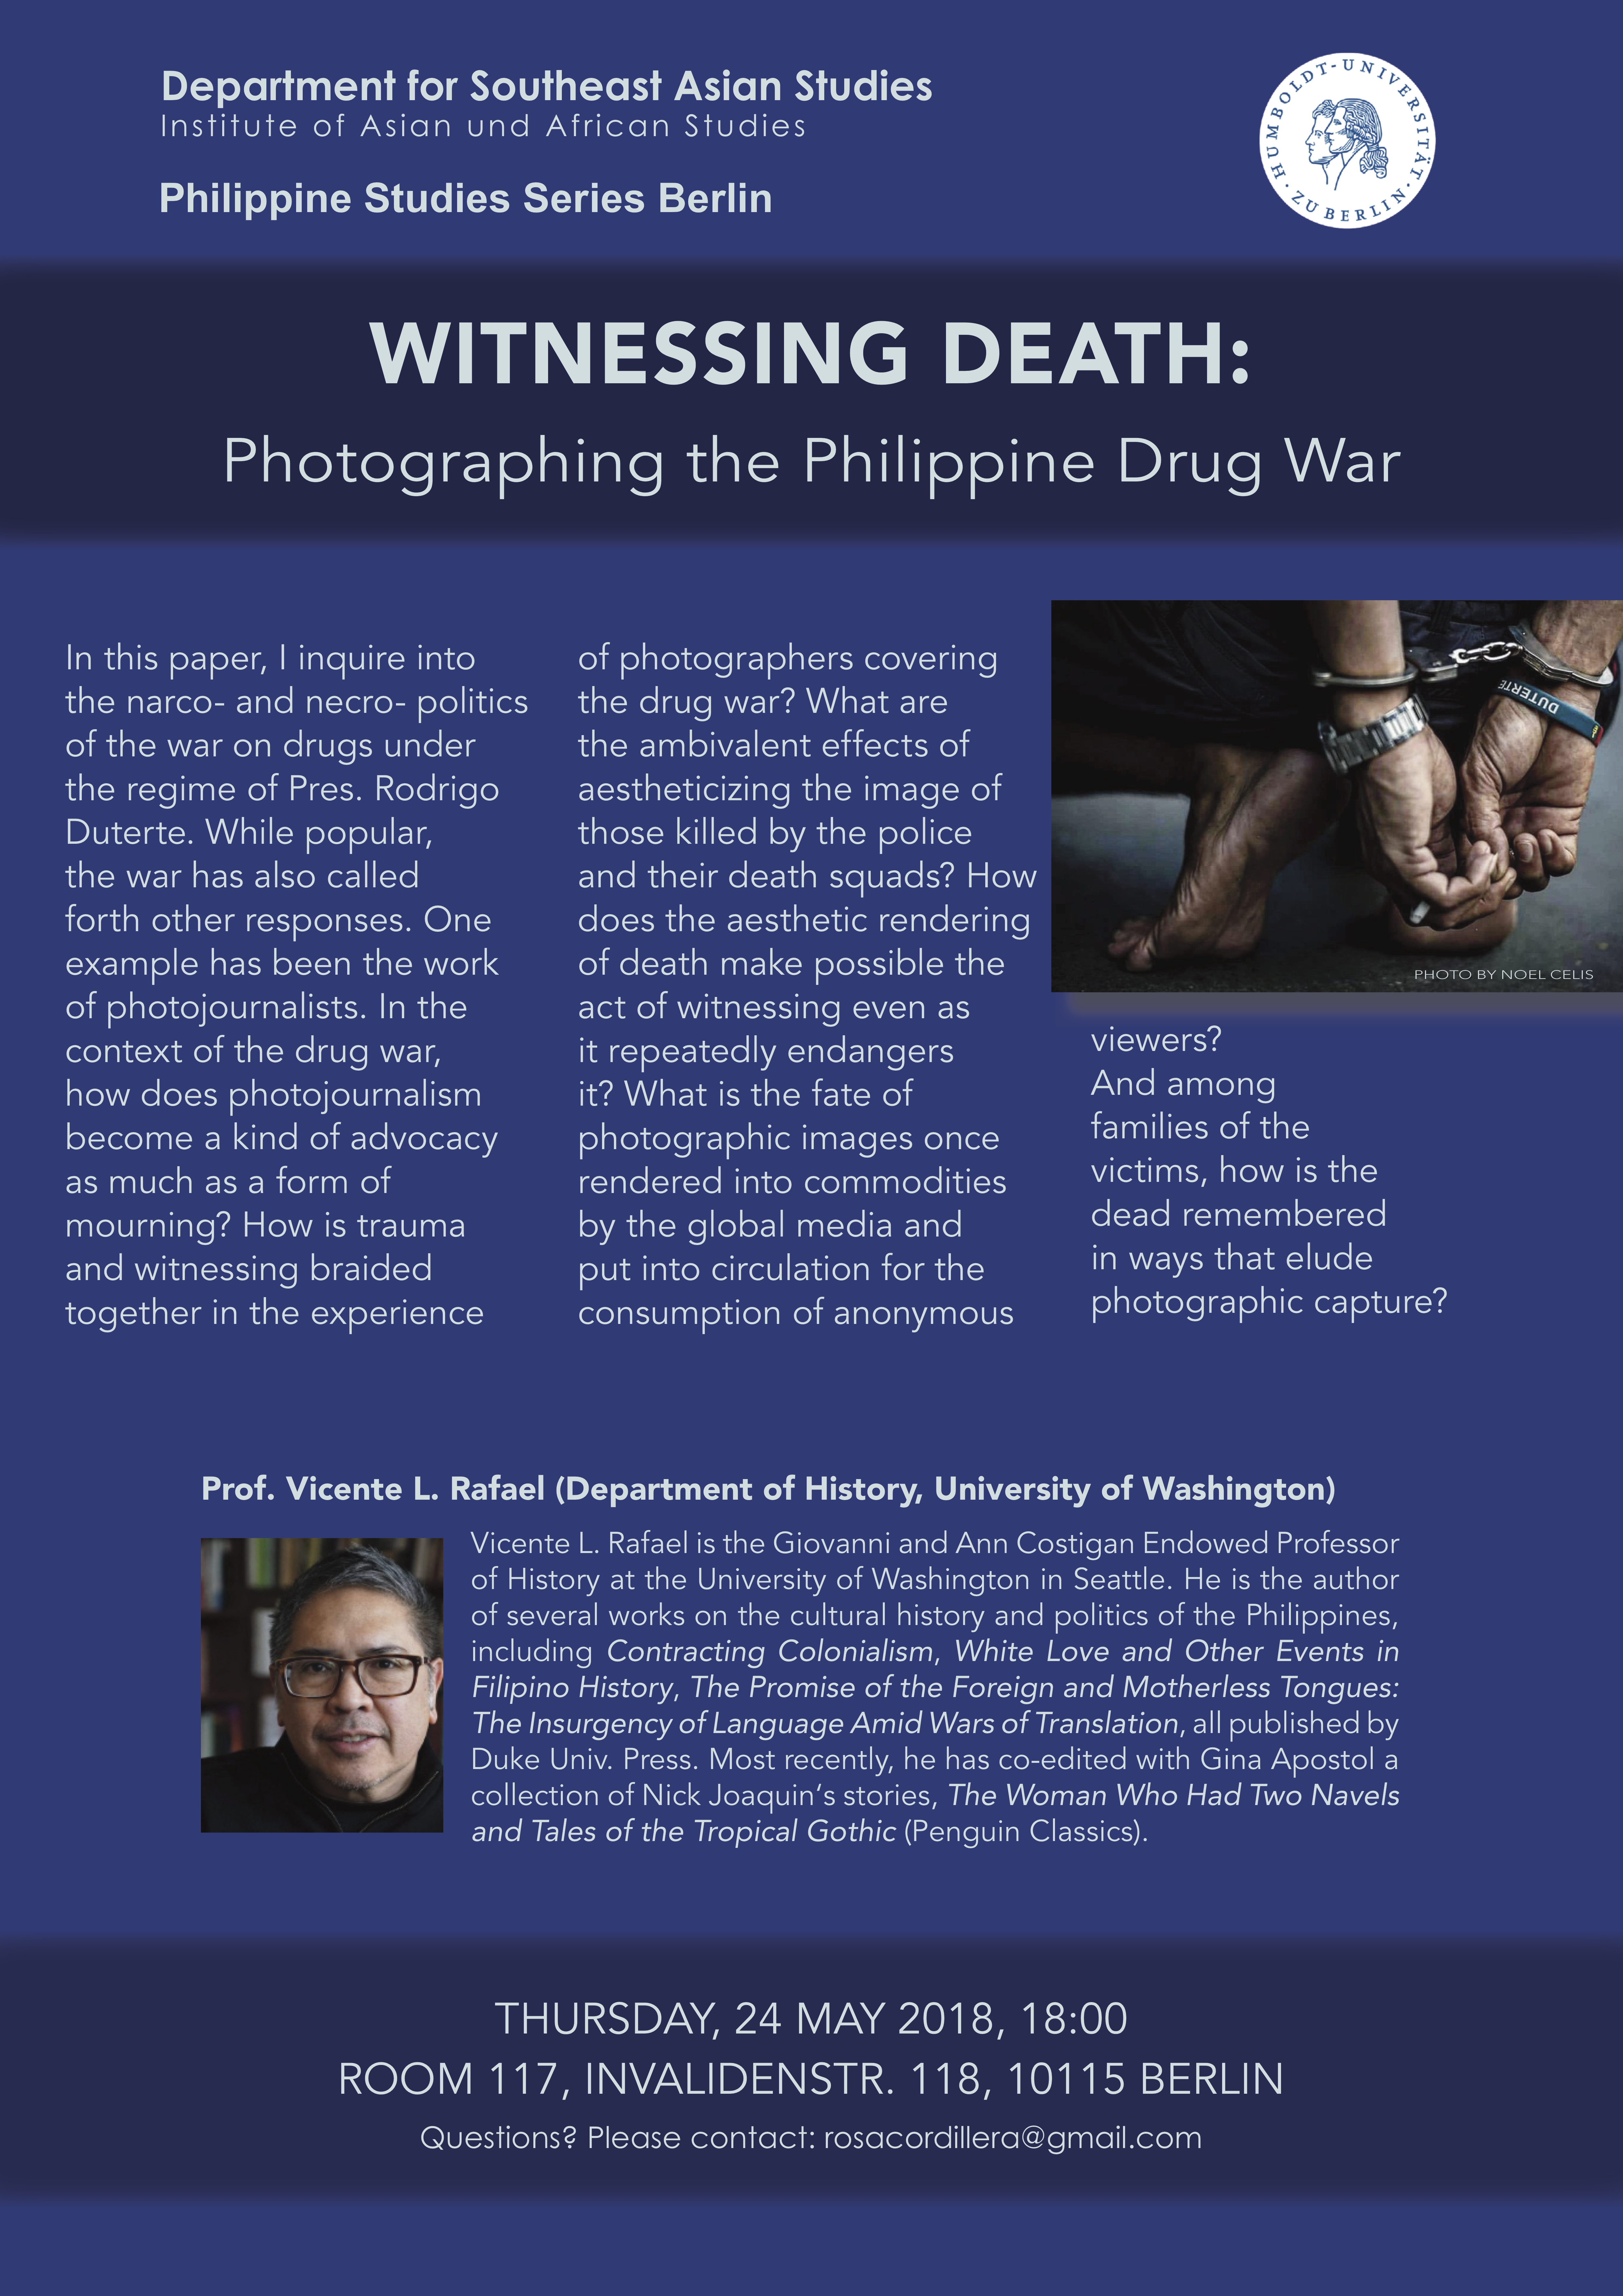 Lecture: "Witnessing Death: Photographing the Philippine Drug War"